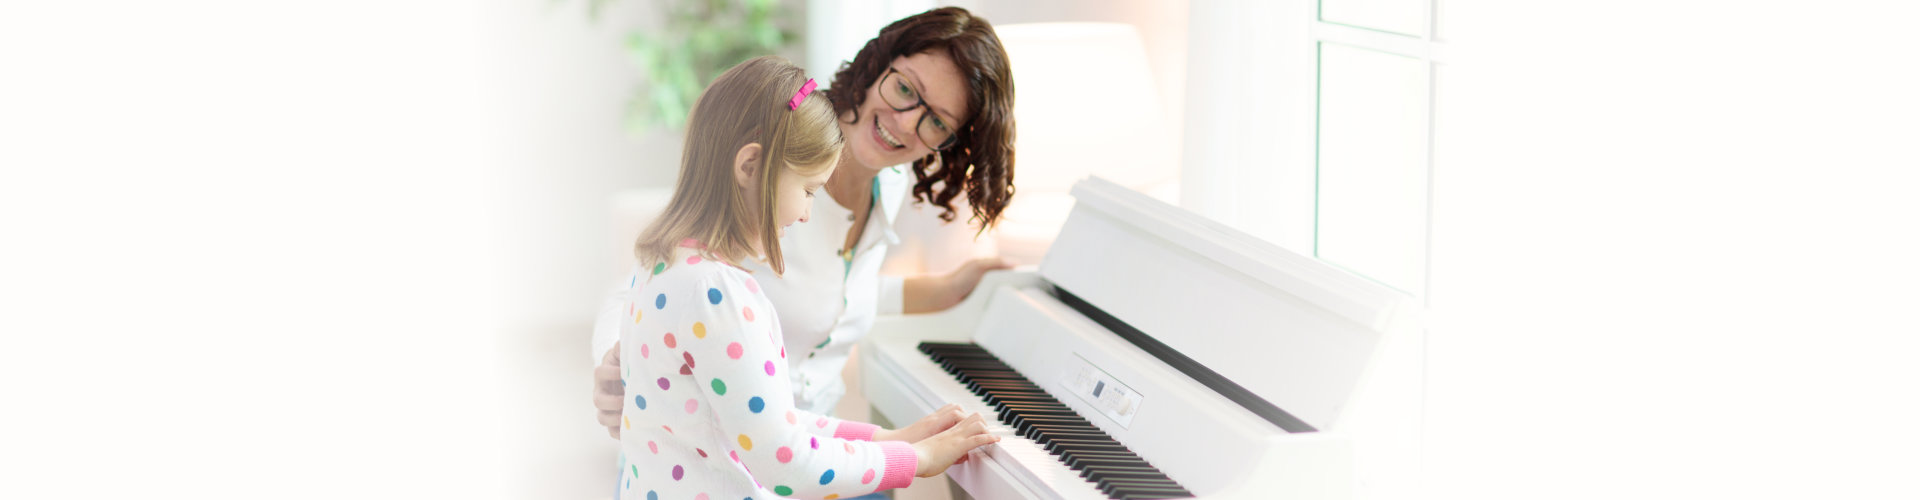 Child playing piano. Kids play music. Classical education for children. Art lesson. Little girl at white digital keyboard. Instrument for young student. Music class in school or at home